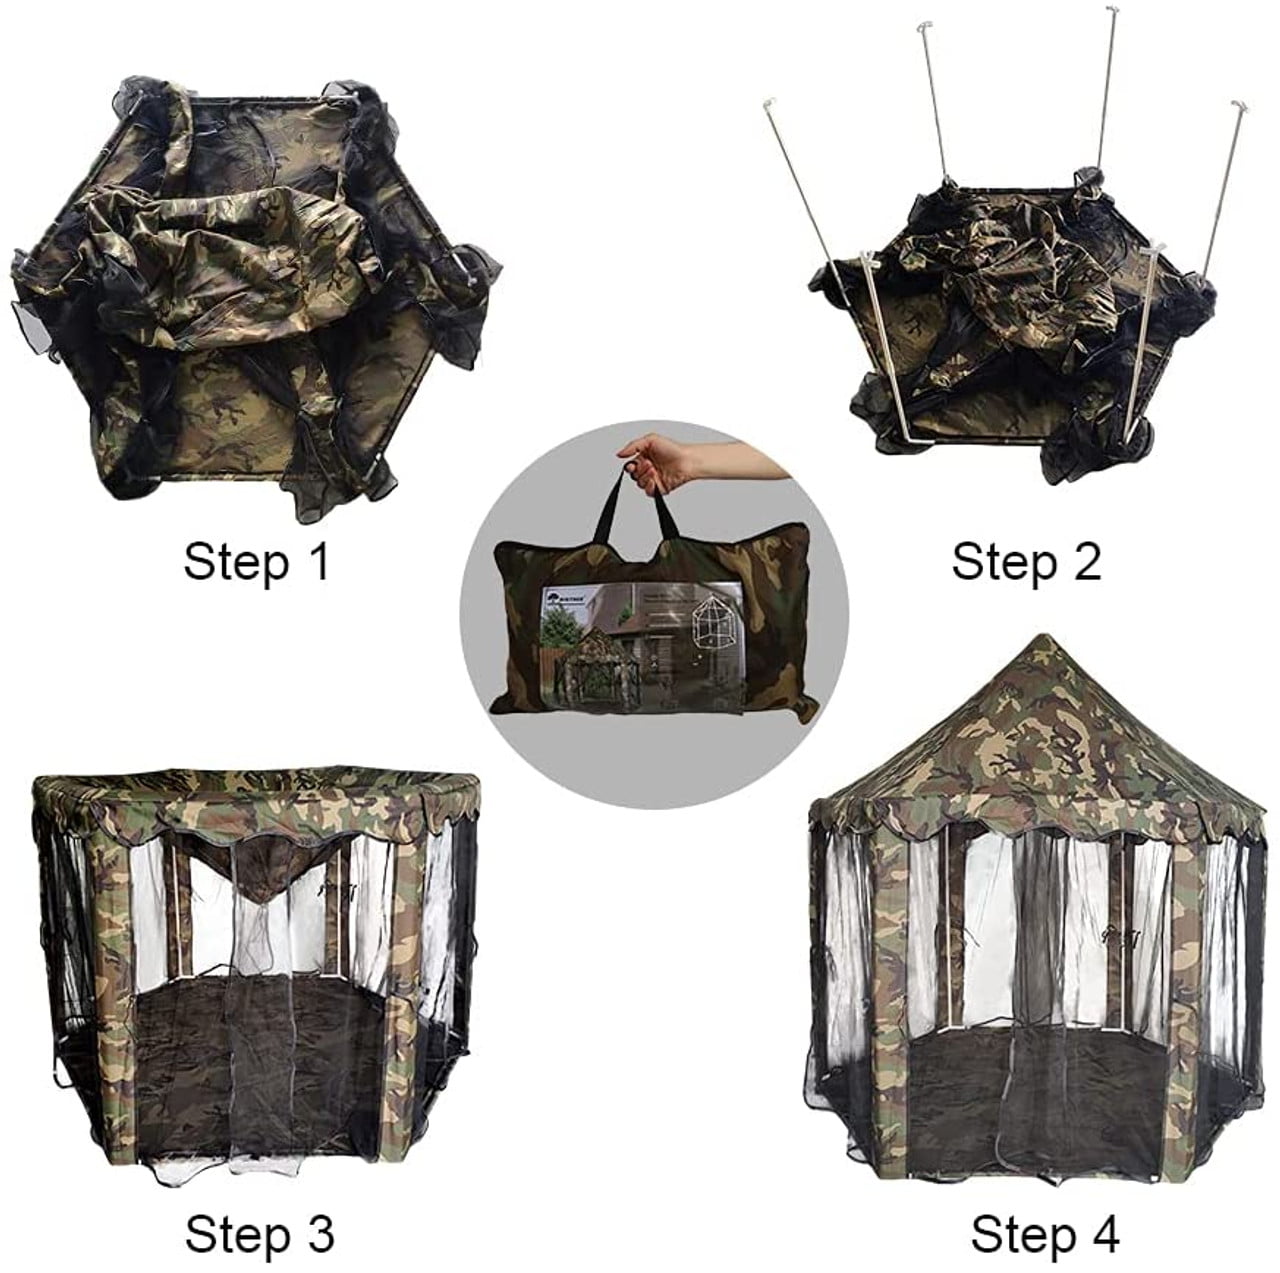 Camouflage Castle Kids Play Tent For Indoor And Outdoor